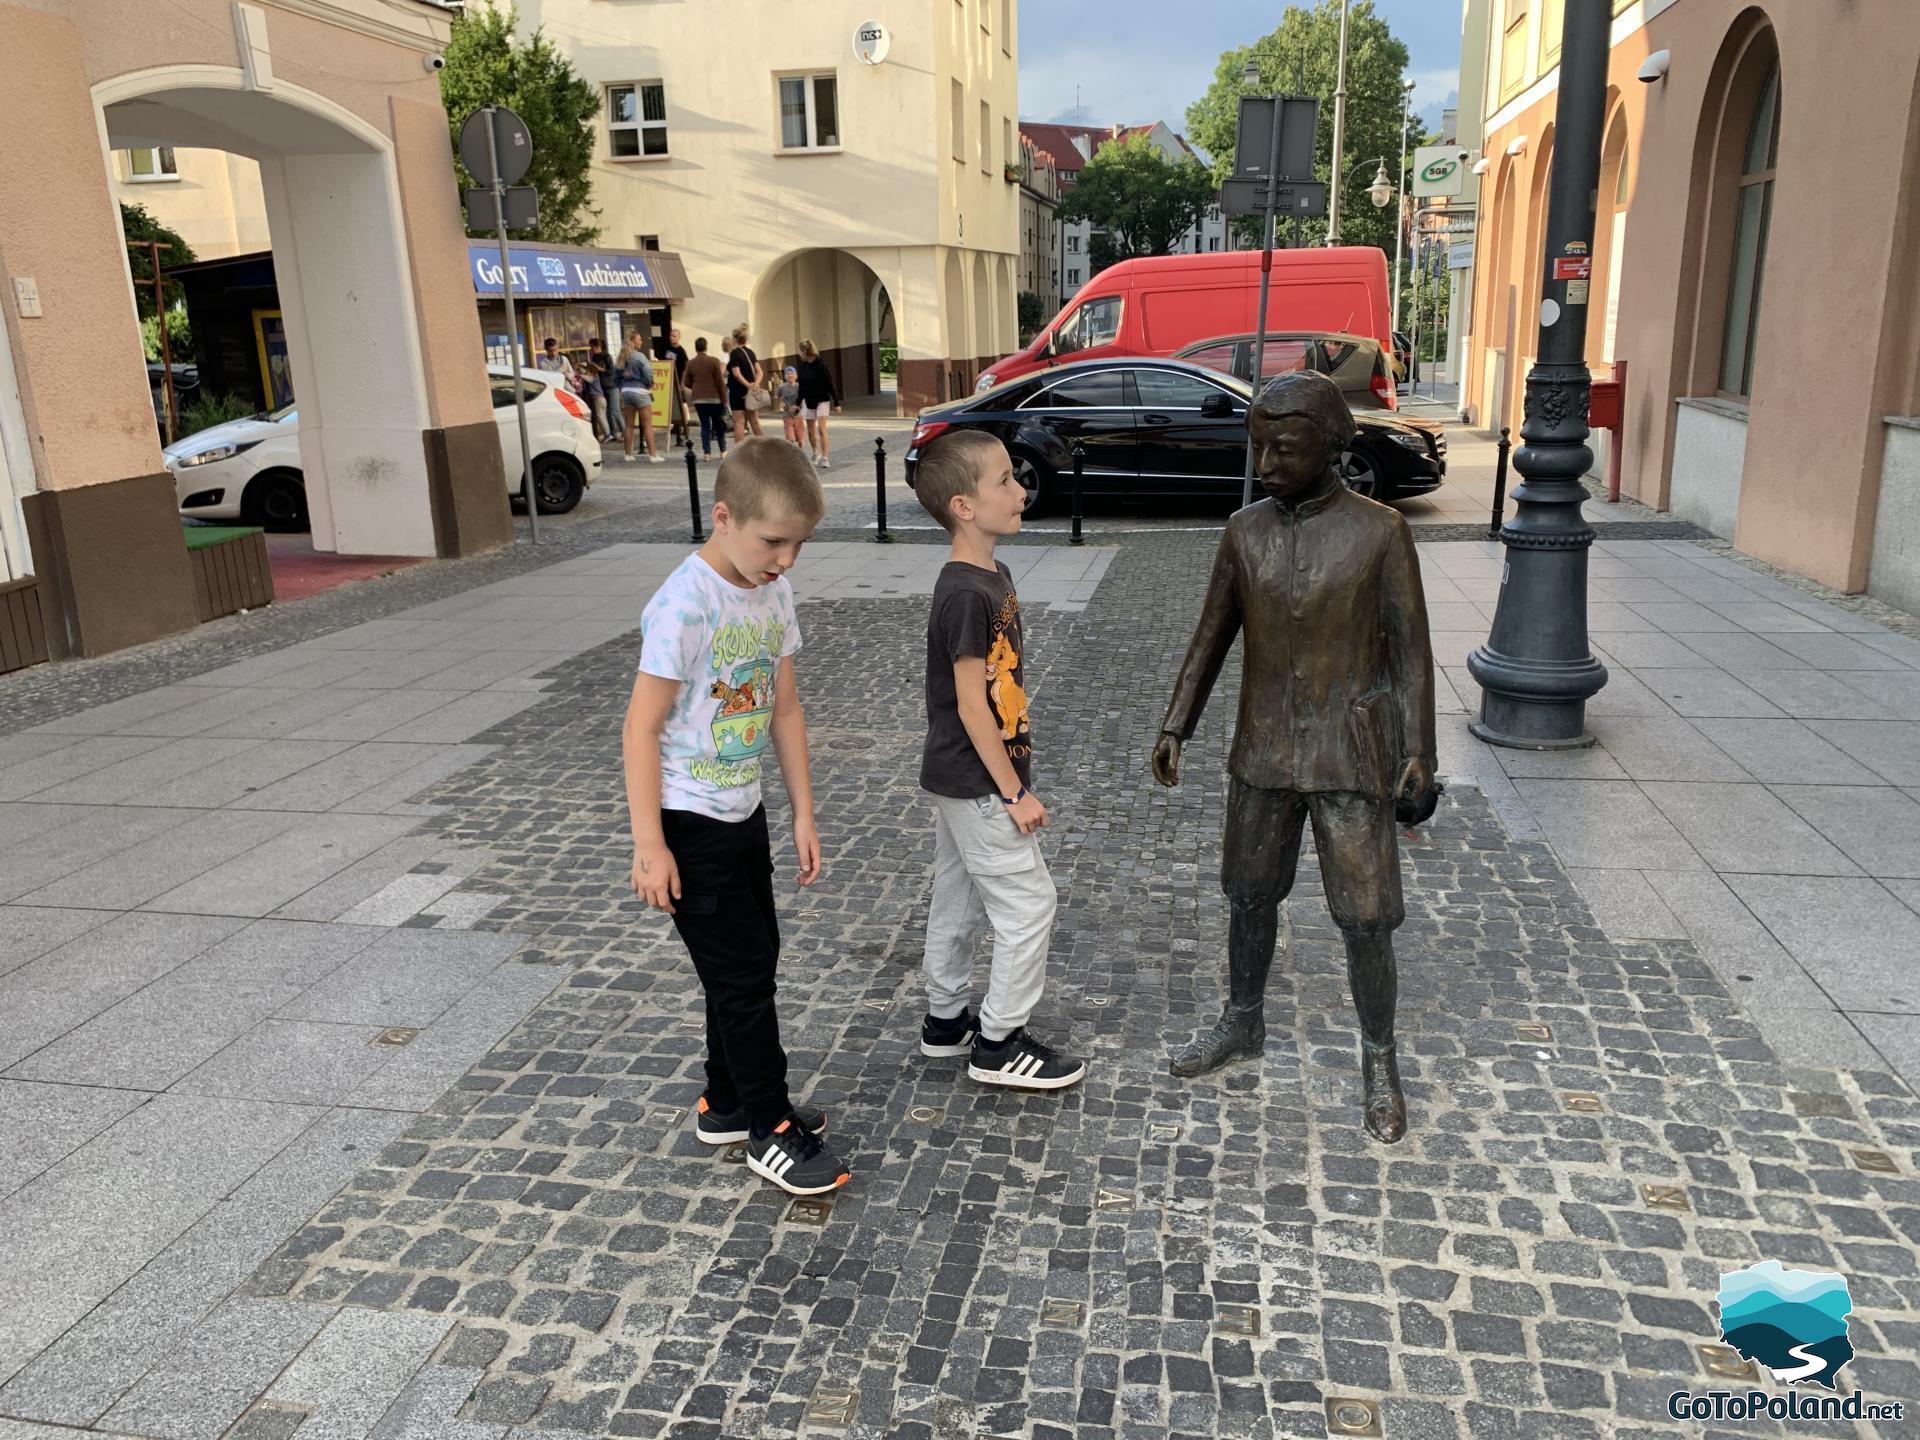 two boys are near the statue of the little man who was the creator of the Esperanto language